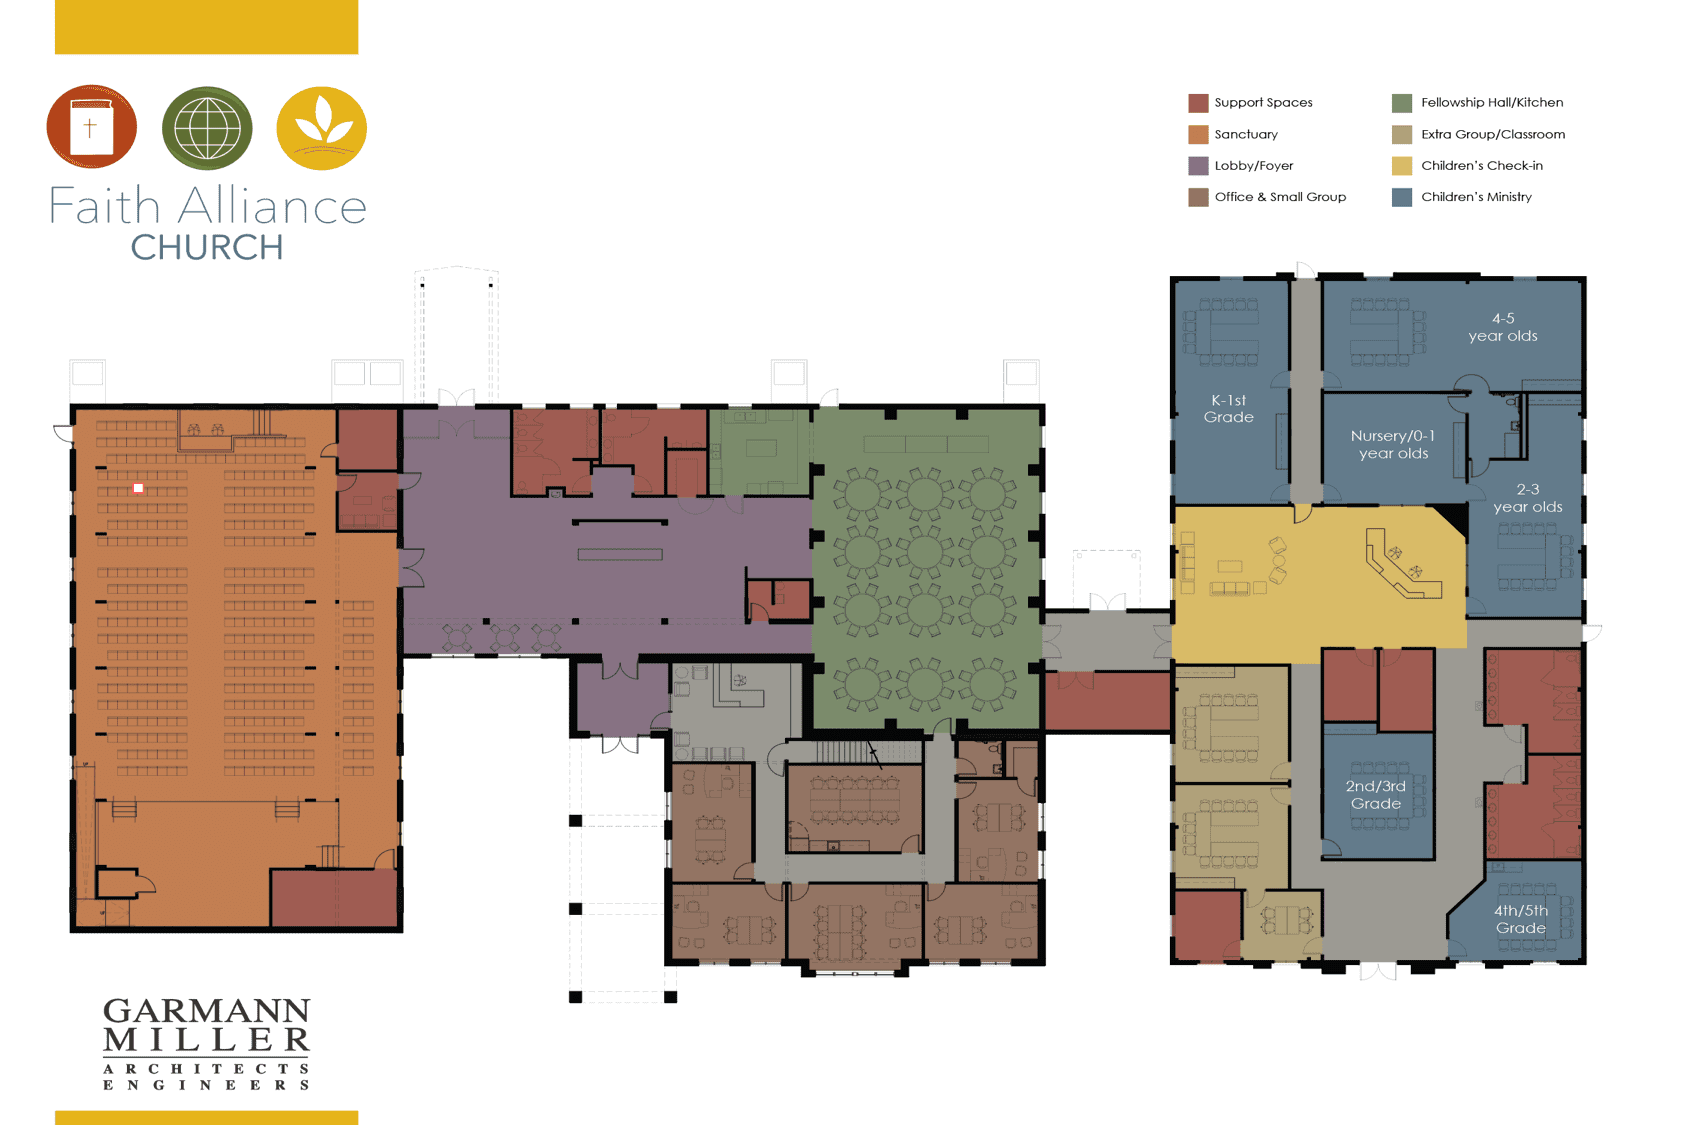 layout color-coded